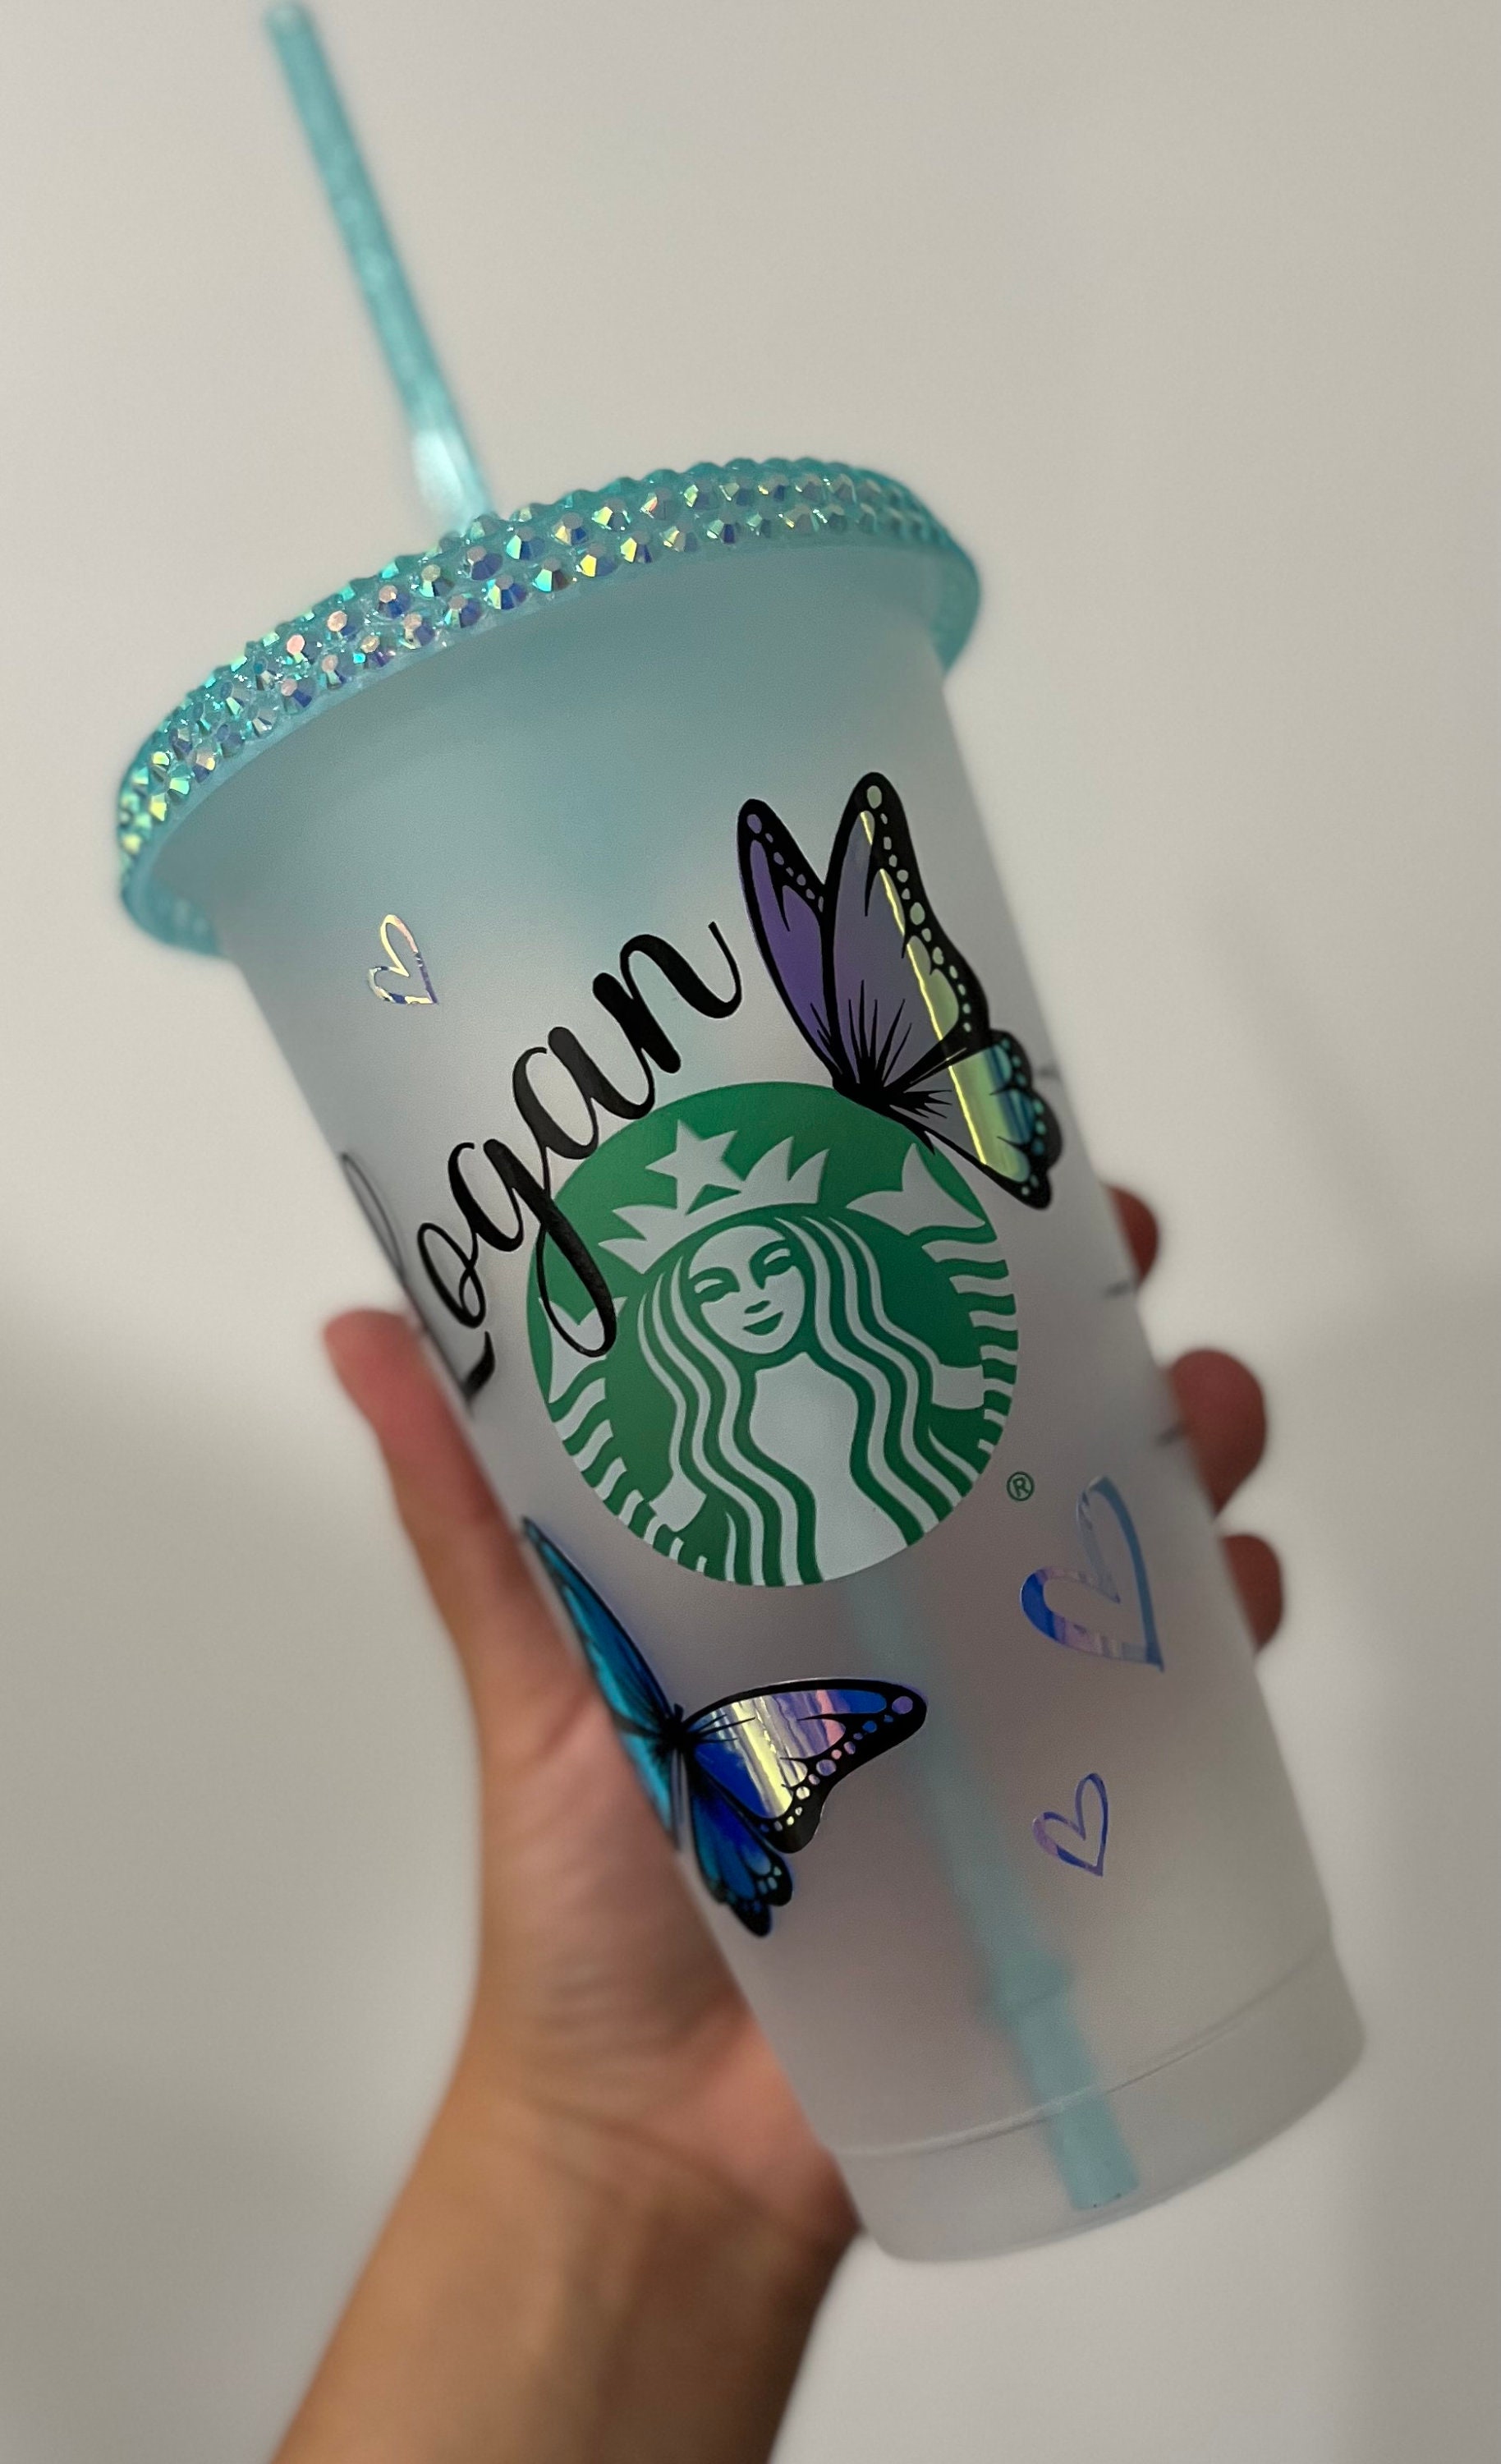 Louis Vuitton (LV) Inspired Starbucks Cup 